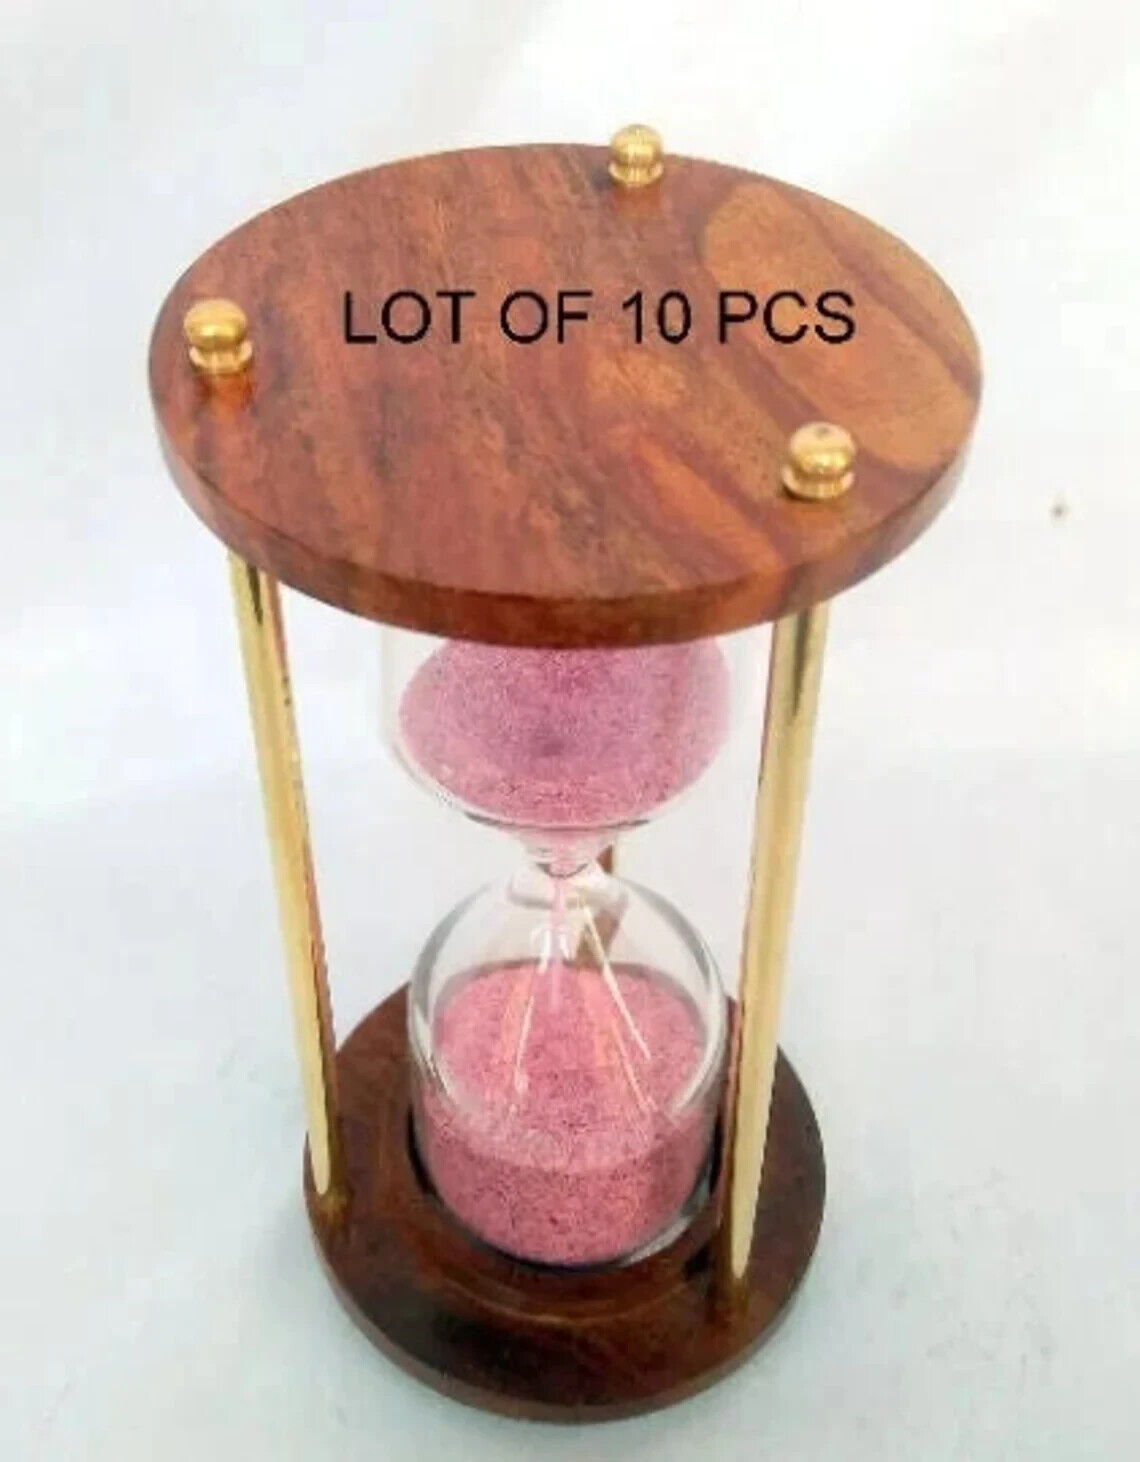 Sand Timer Hourglass Lot Of 10 Pcs Home Decor Wooden And Brass 6 Inch 5 Minutes